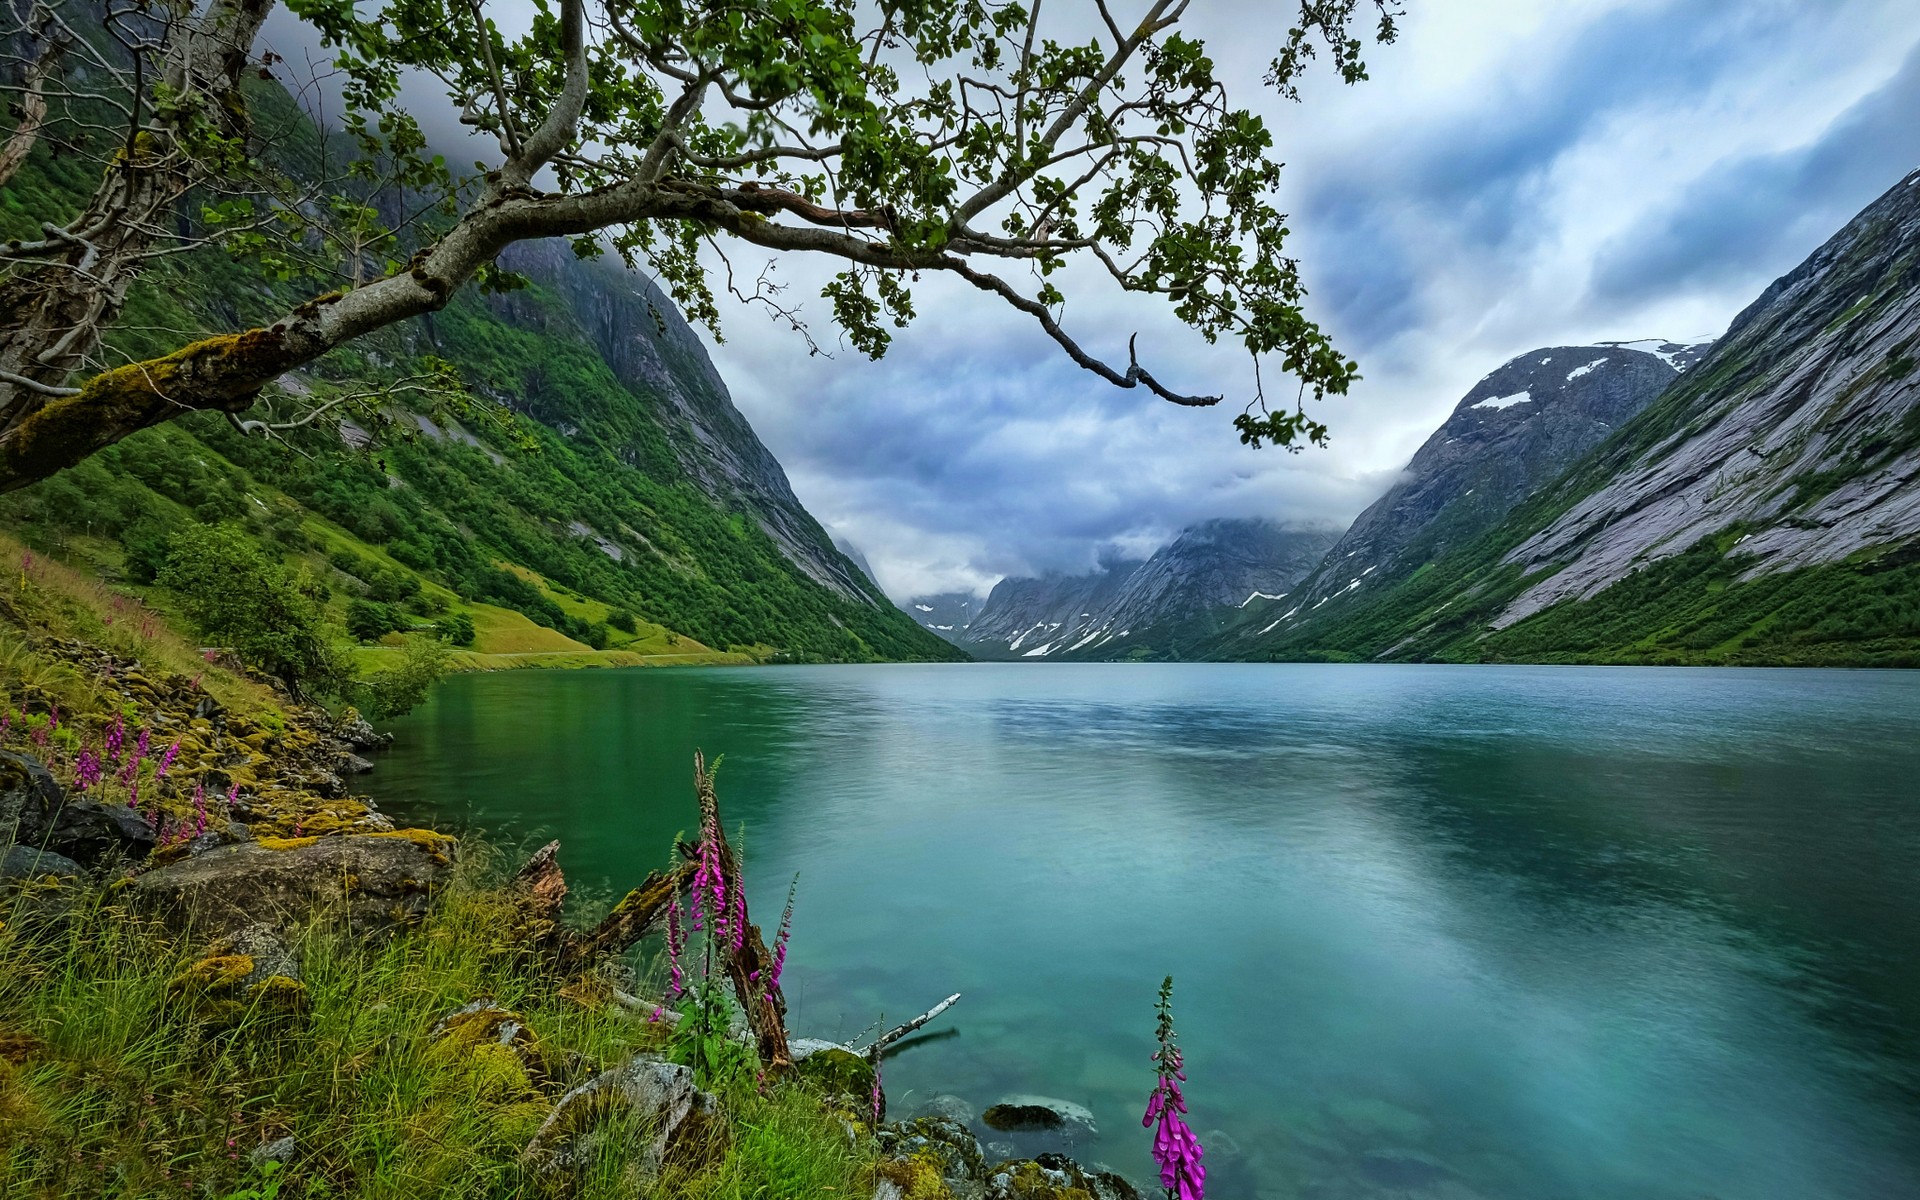 Wallpaper, trees, landscape, mountains, lake, nature, reflection, grass, clouds, Norway, river, summer, fjord, wildflowers, wilderness, Alps, reservoir, highland, loch, mountainous landforms, landform, body of water, mountain range 1920x1200